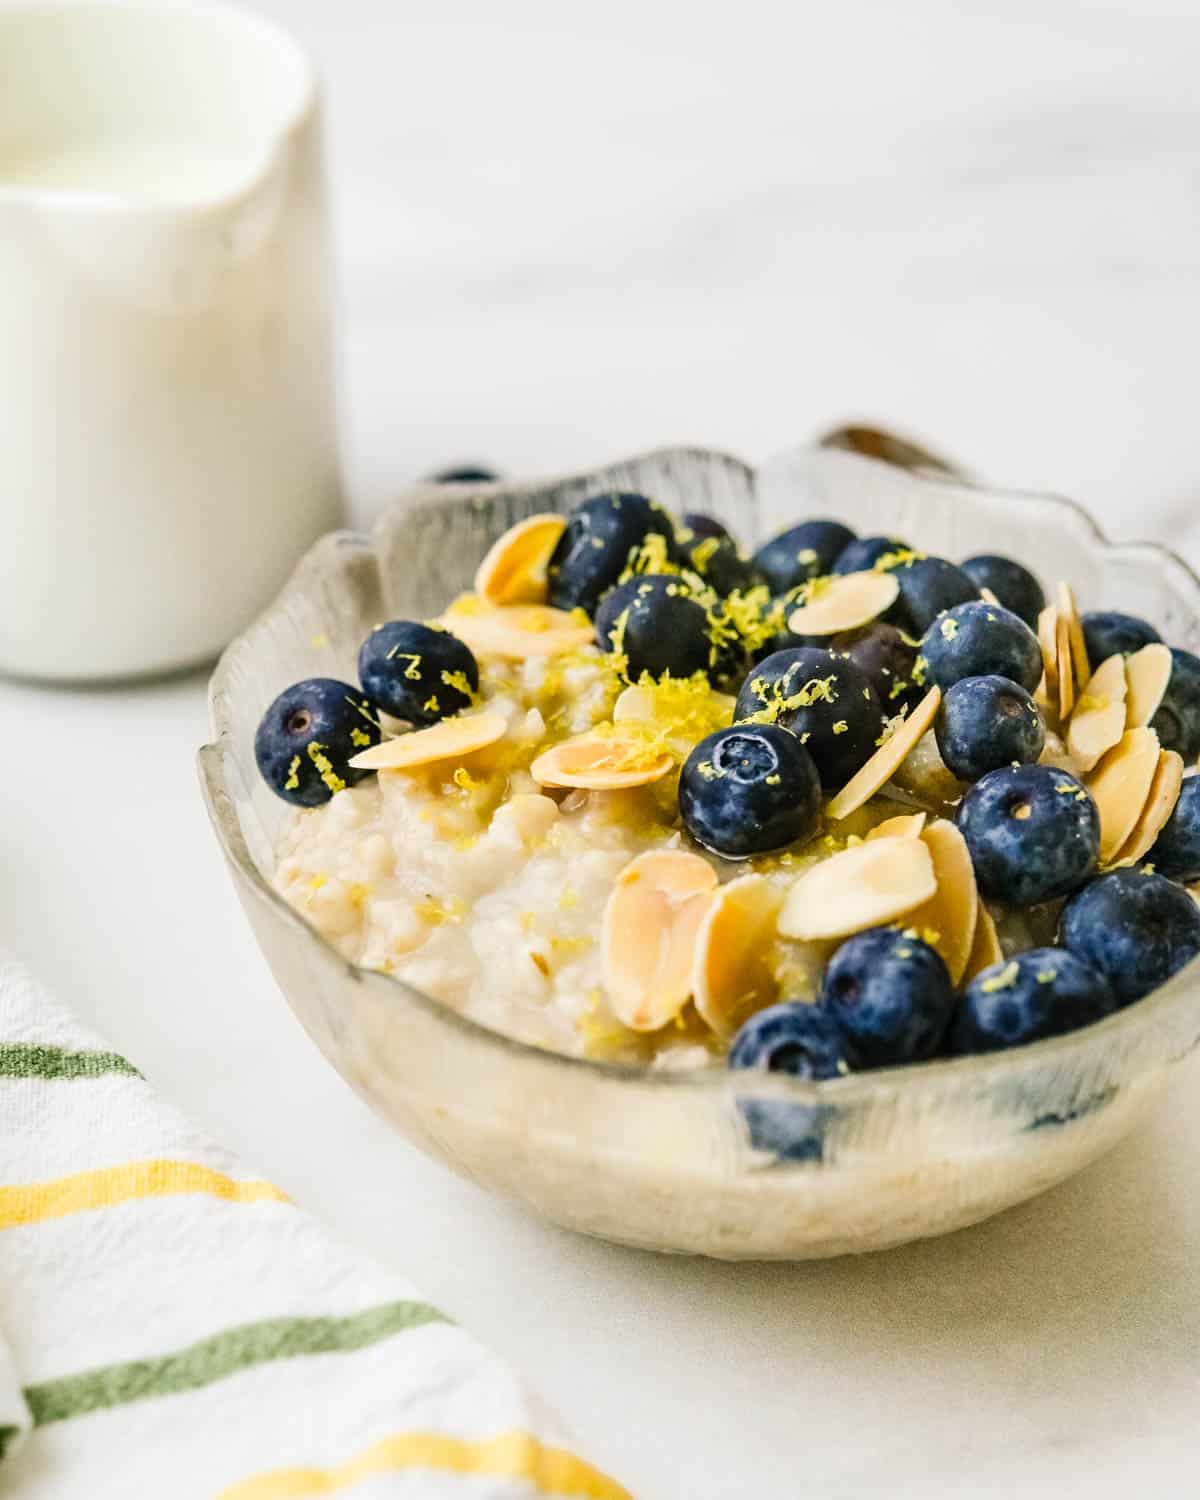 A bowl of Irish oatmeal with blueberries.